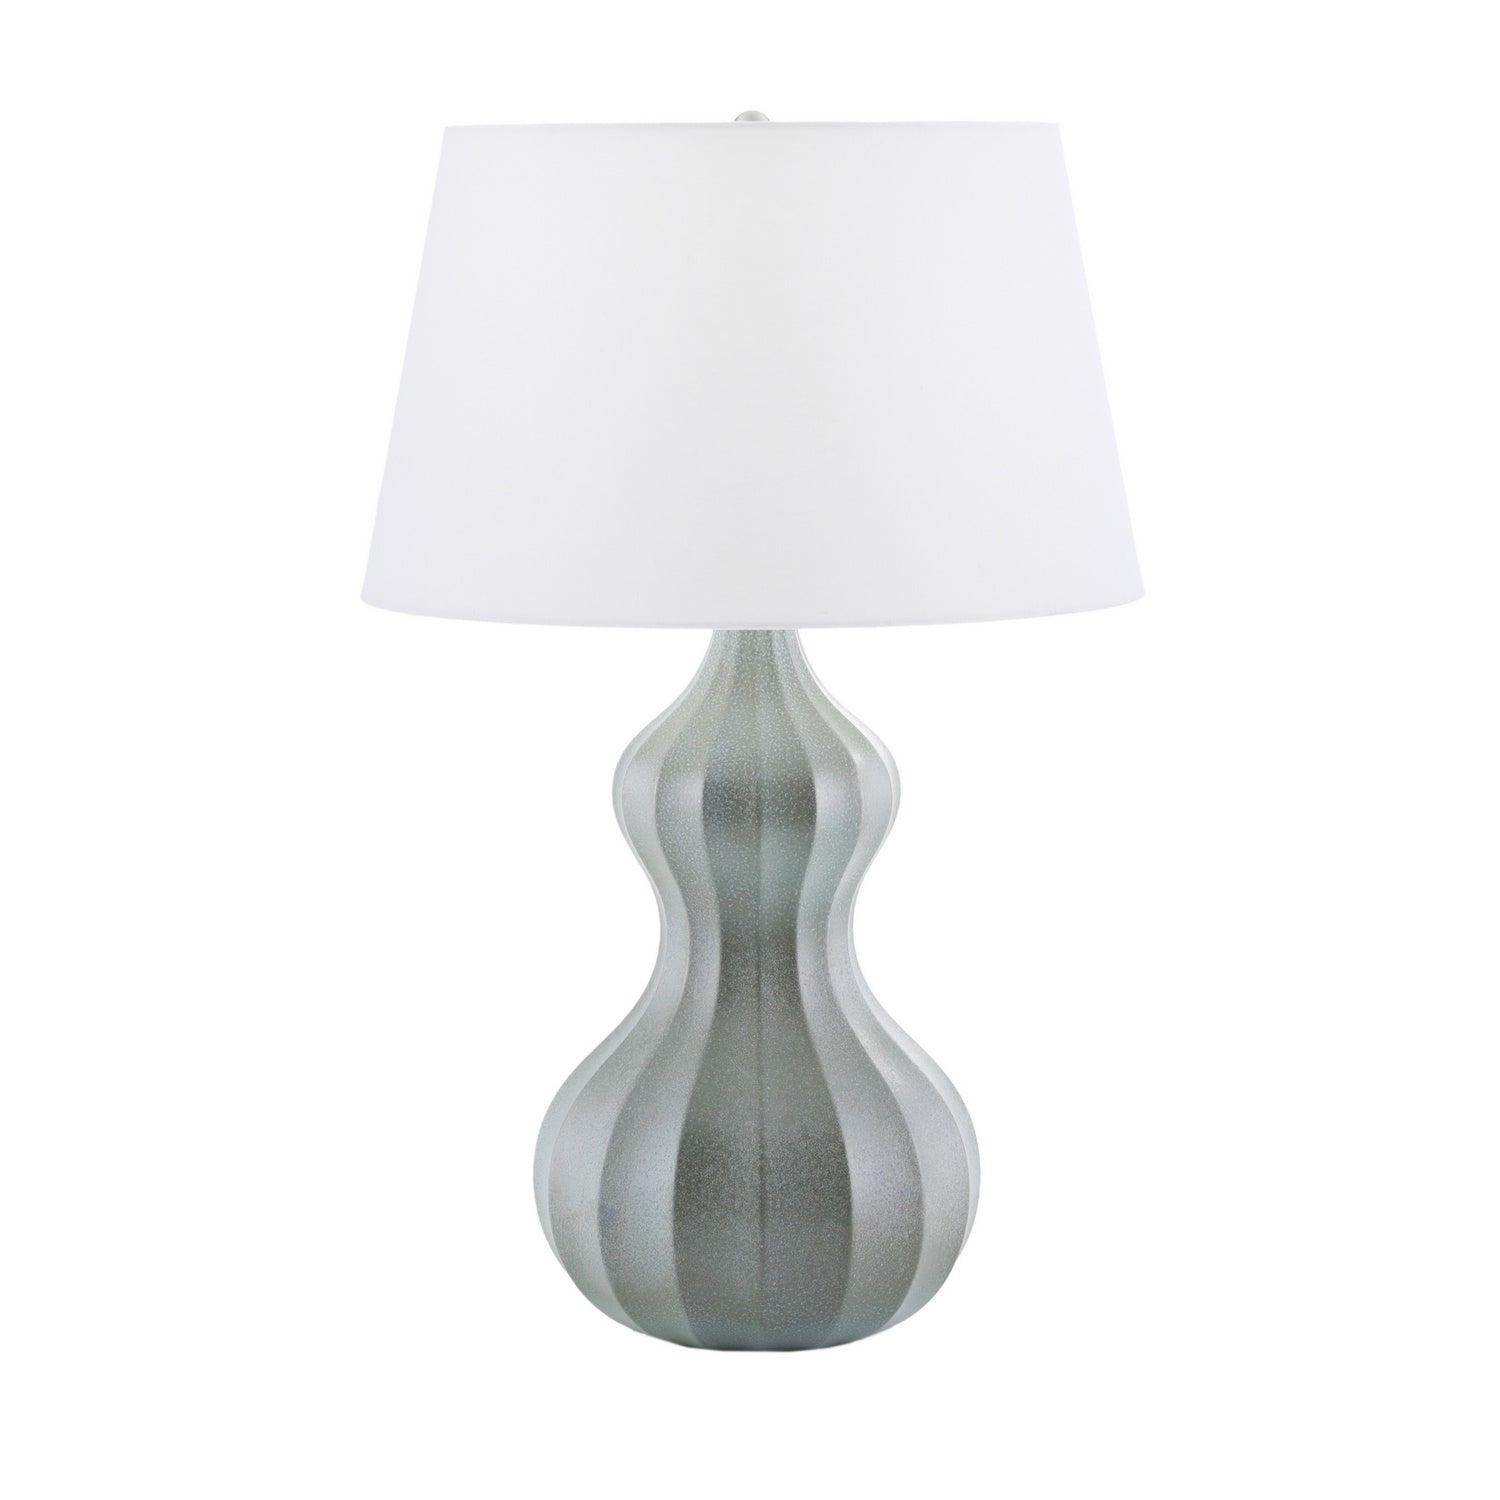 One Light Table Lamp from the Shirley collection in Seafoam Reactive finish